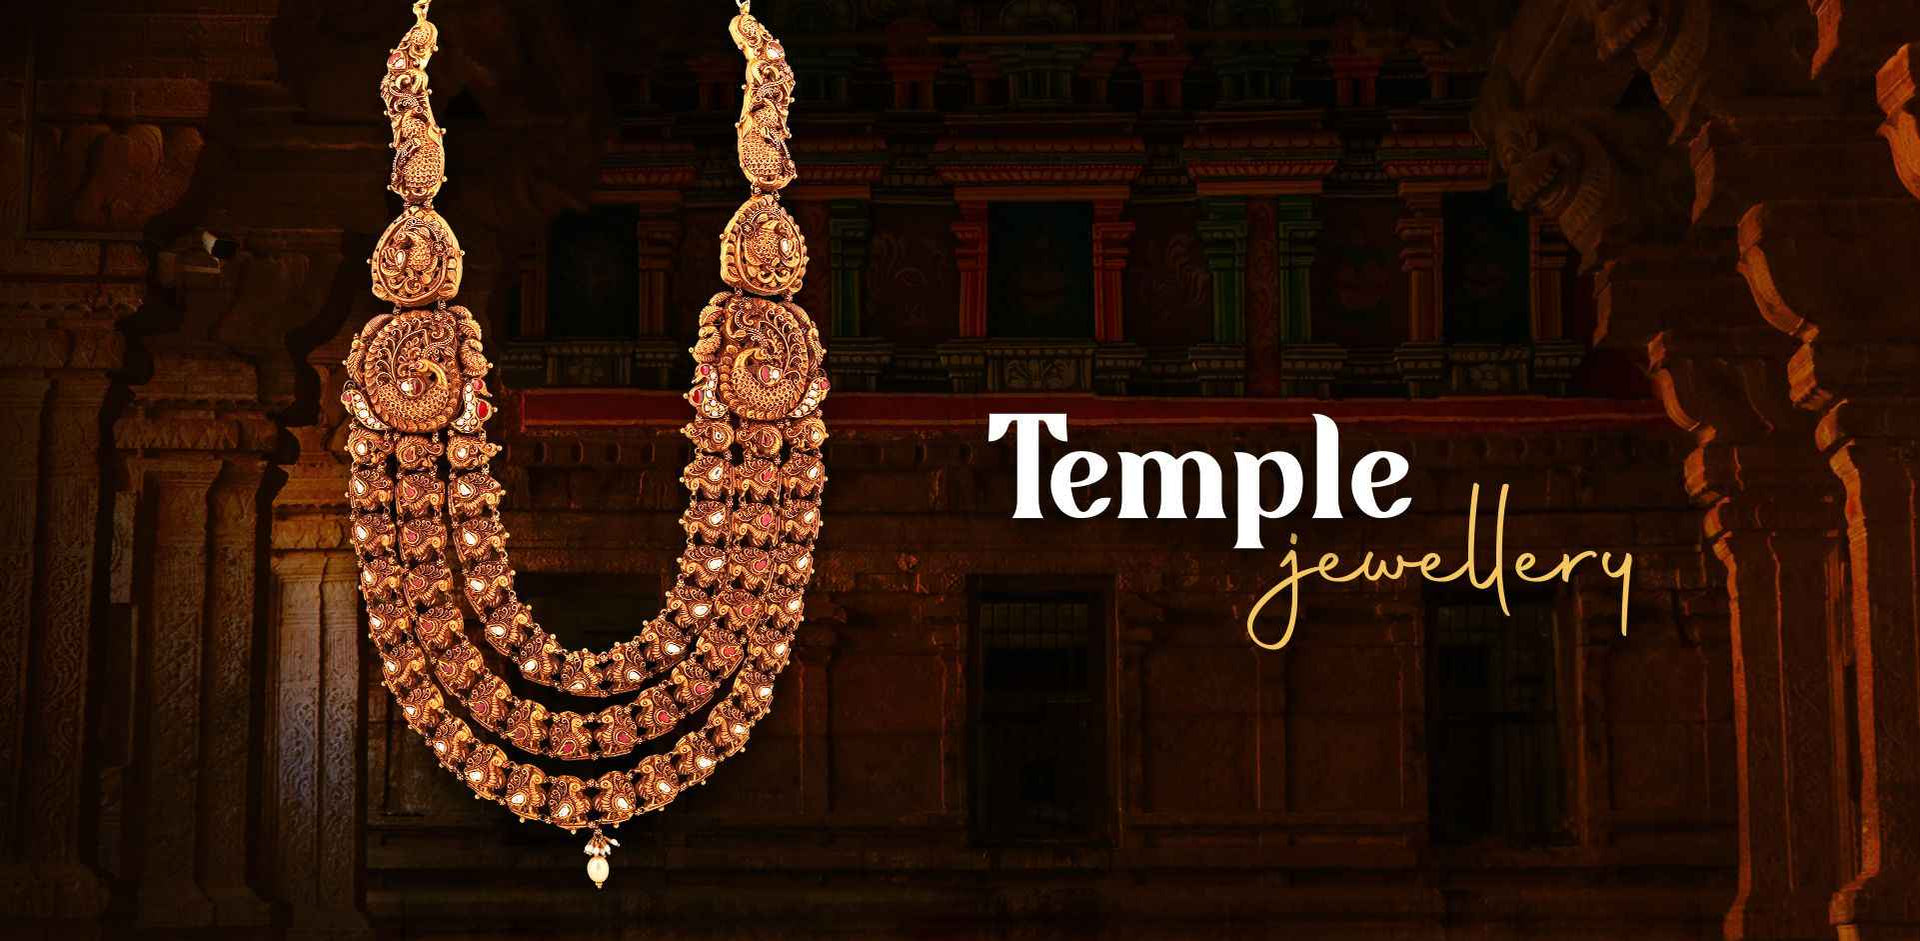 How And Where To Sell Gold Jewellery In Chennai? - Goodreturns